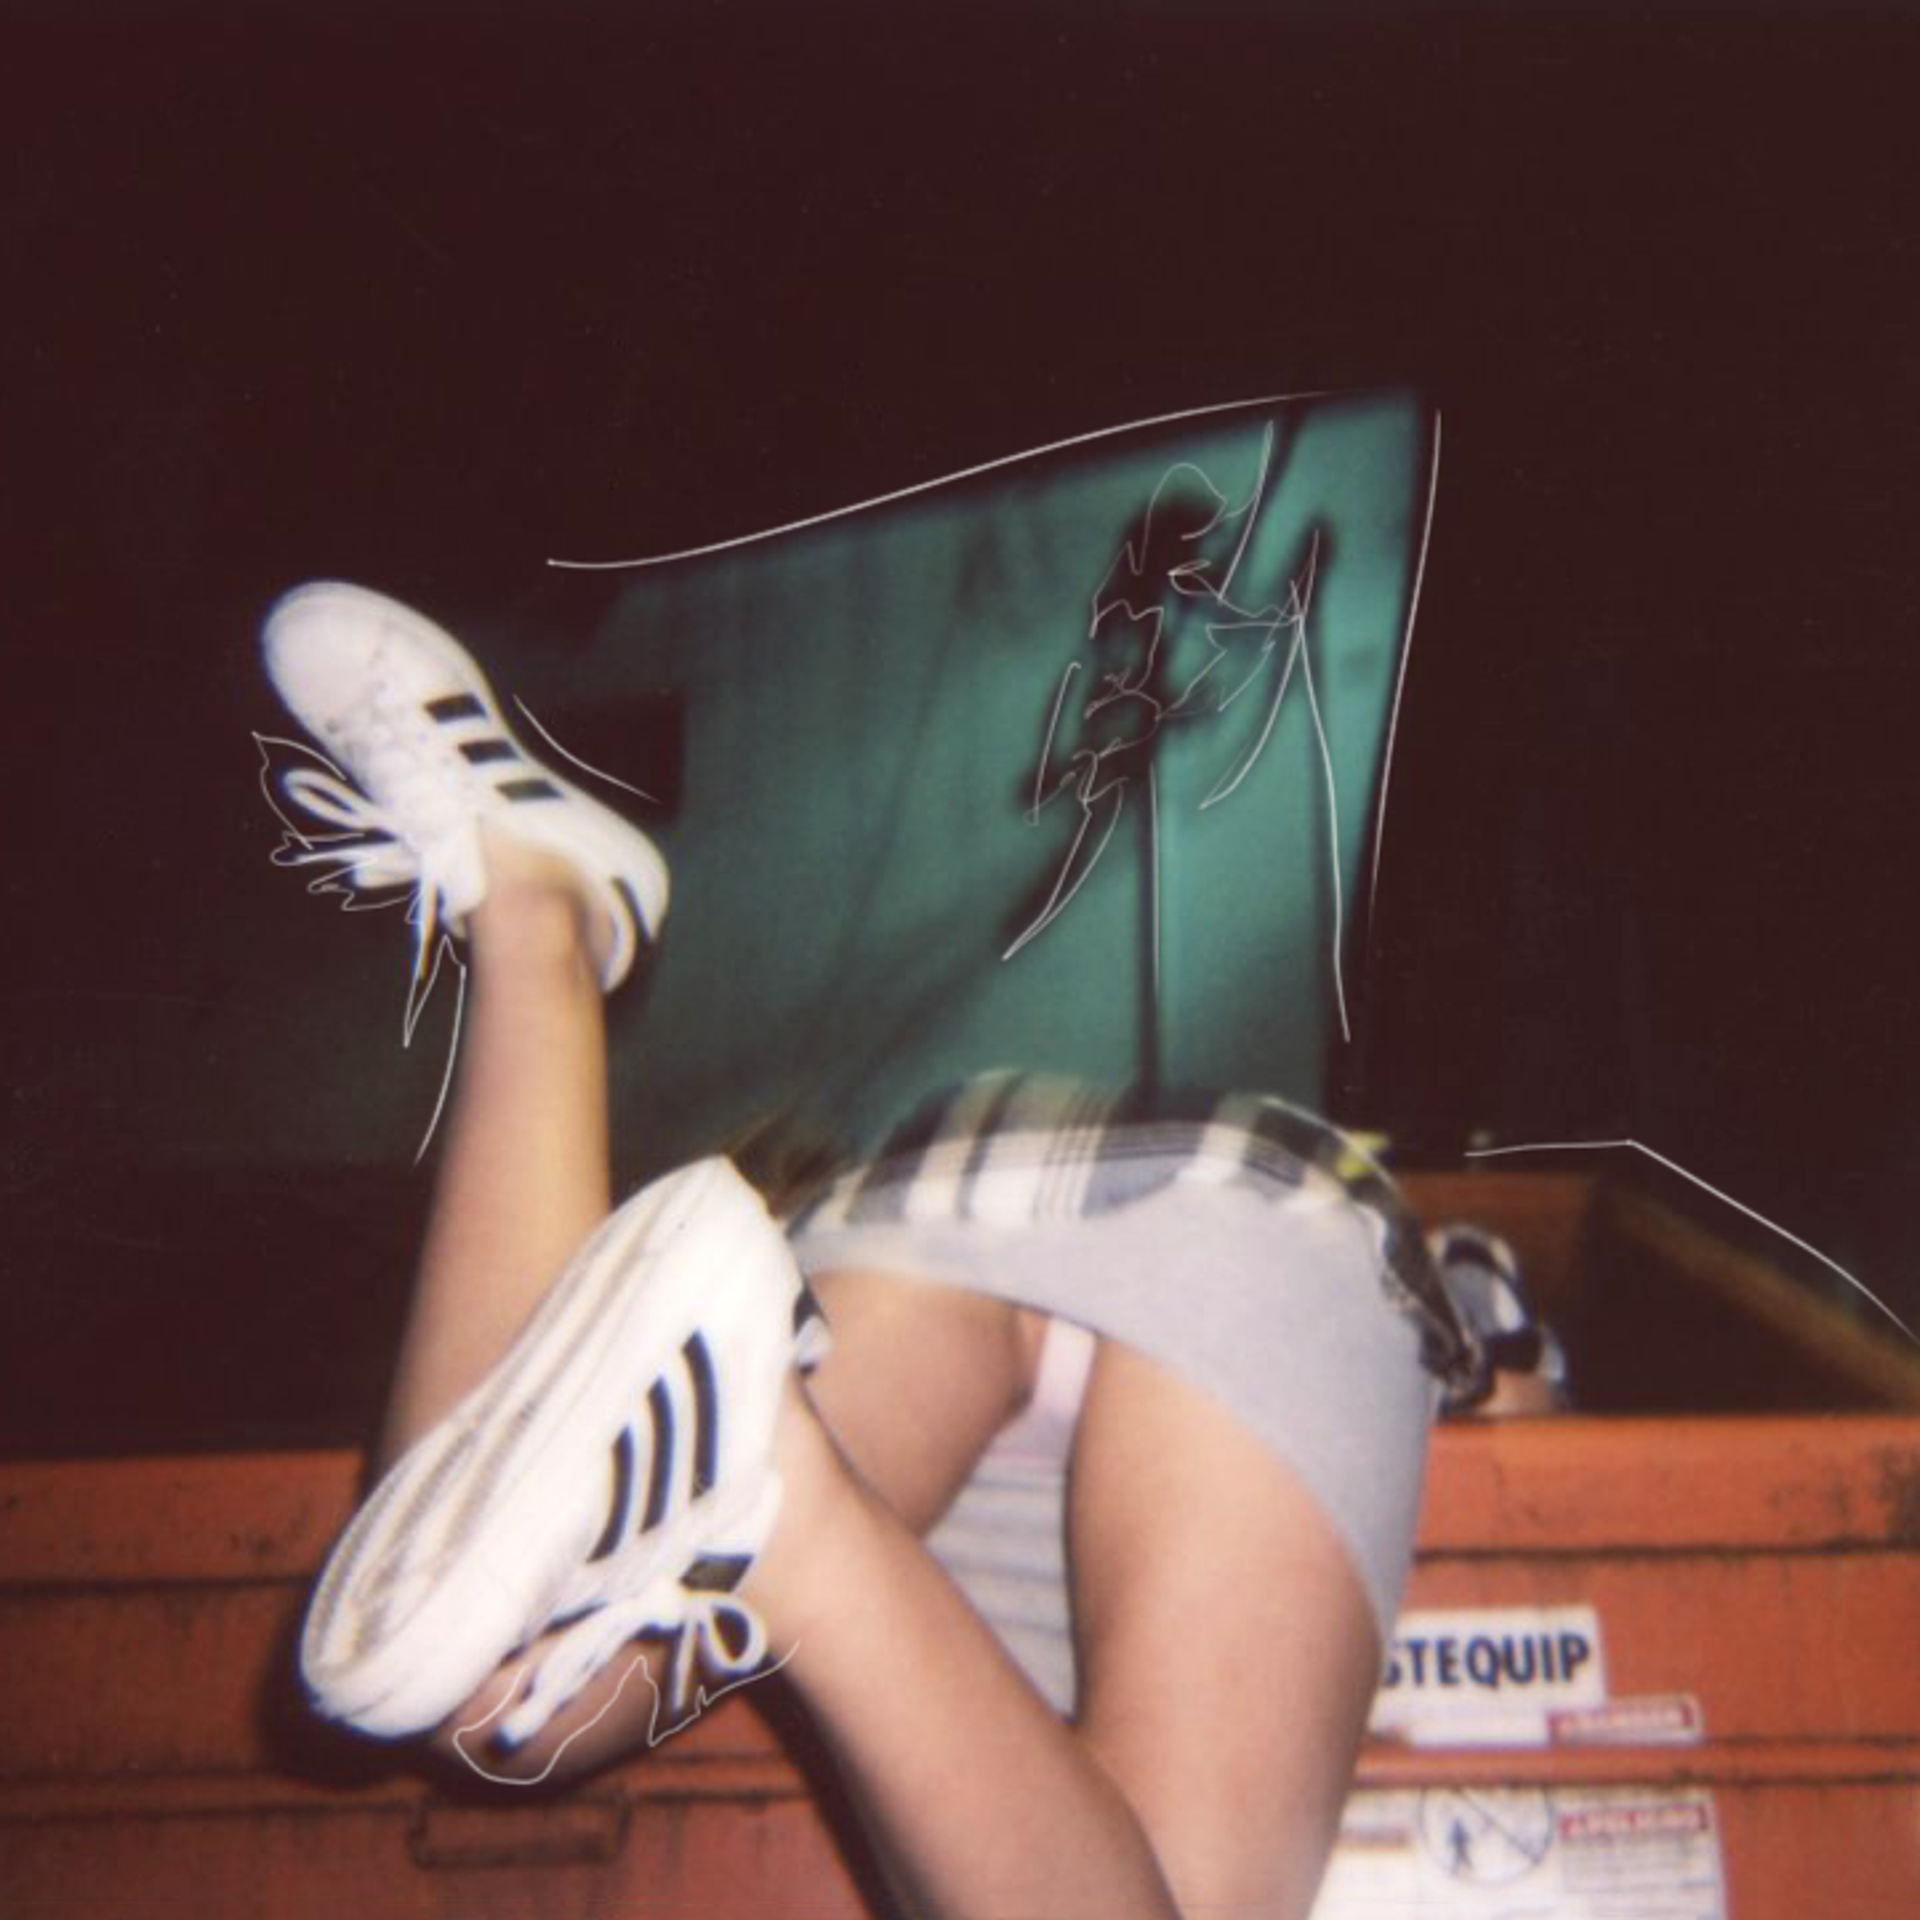 Dumpster Diving by CAZADOR